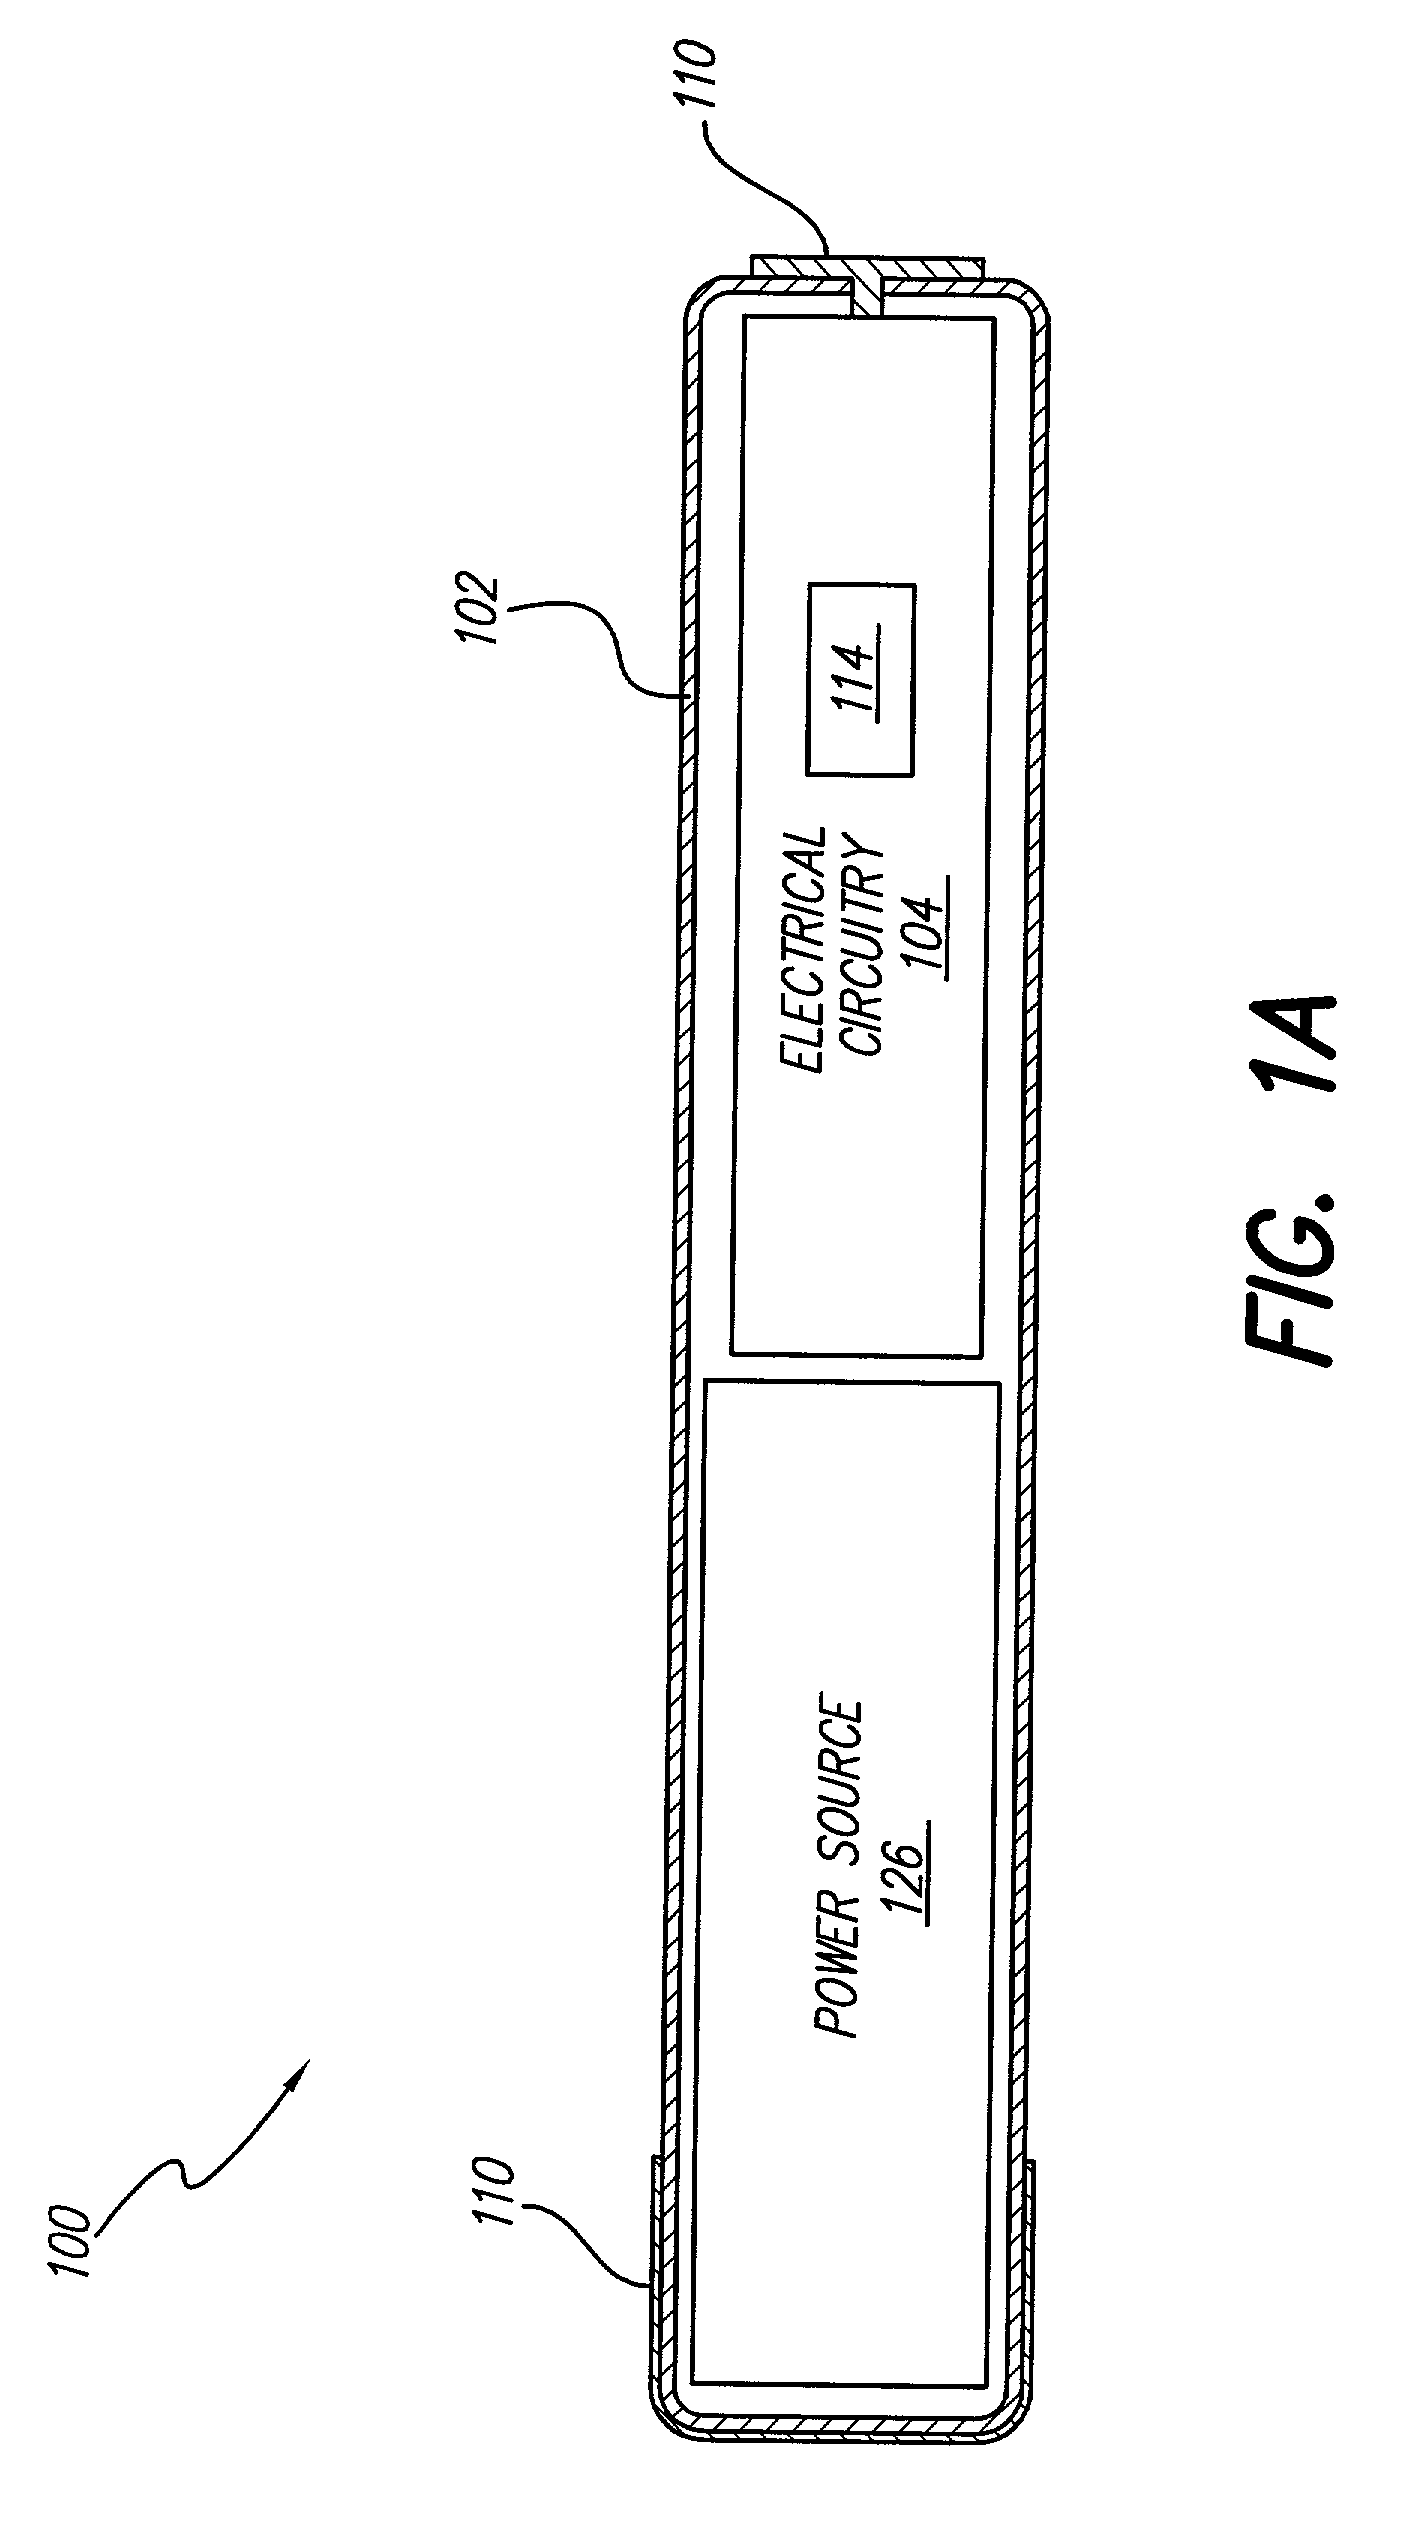 Implantable microstimulators and methods for unidirectional propagation of action potentials